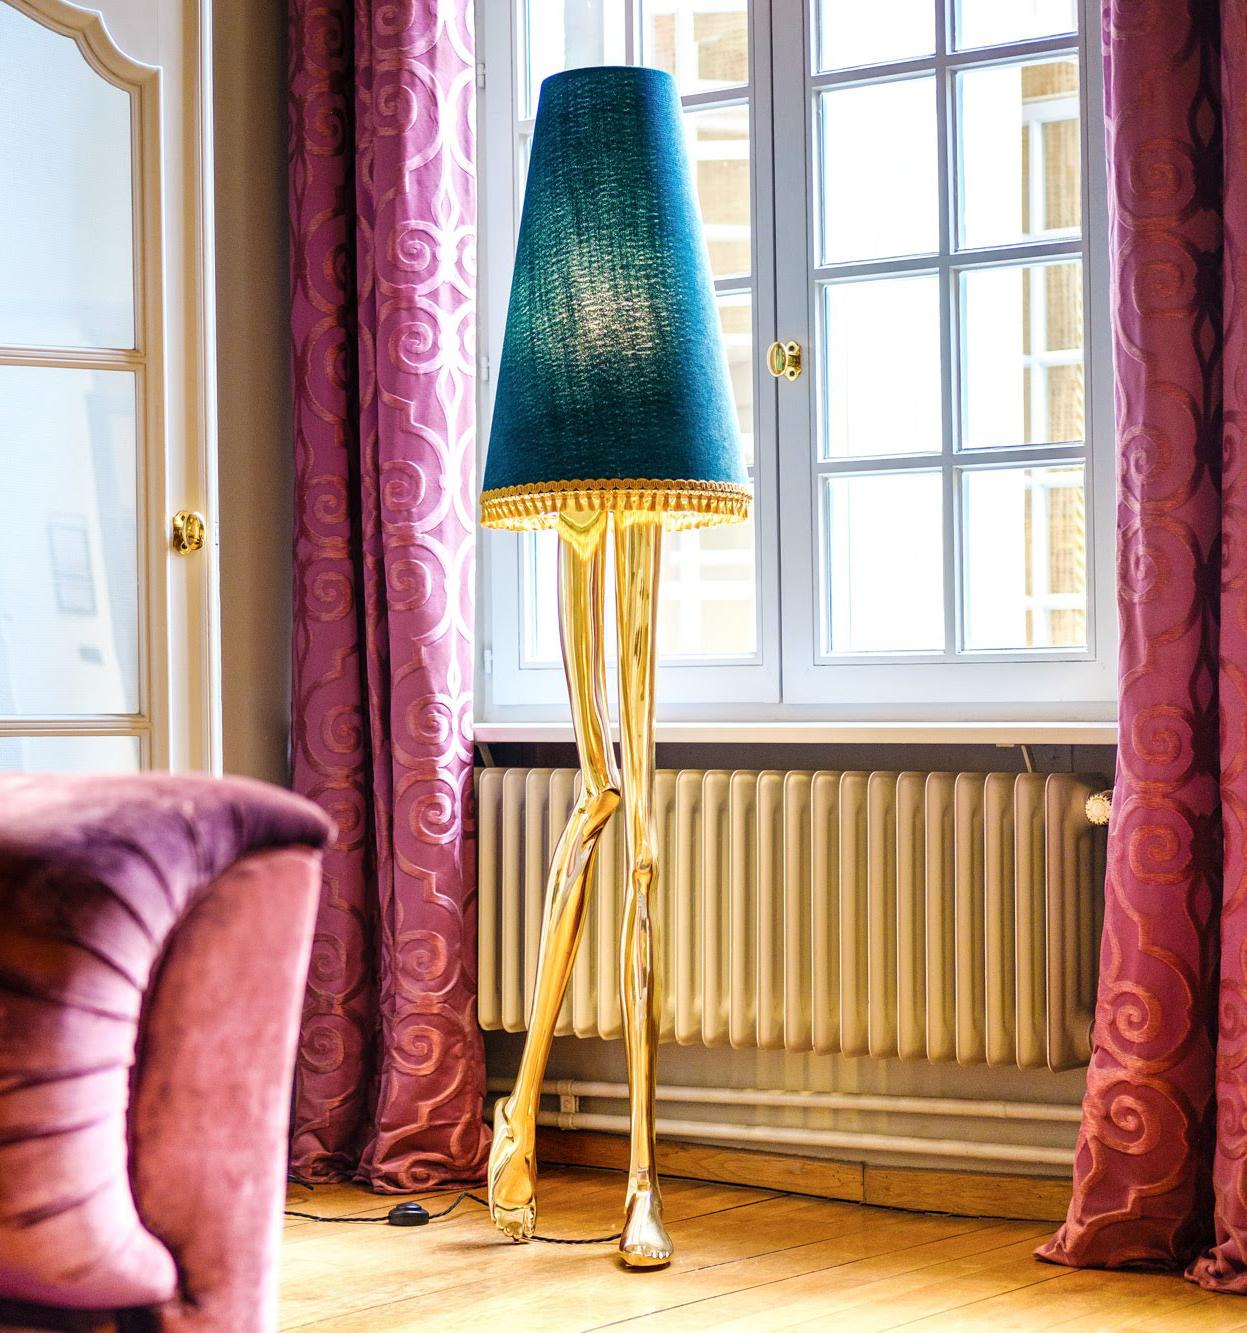 Inspiration:  
Marilyn Monroe, the sexiest Pin-up of the 1950s, inspired a piece of Art & Design. The design of the Monroe Lamp captures the essence of her image and the sensuality of her legs. The lampshade and the gold tassel fringe complement the